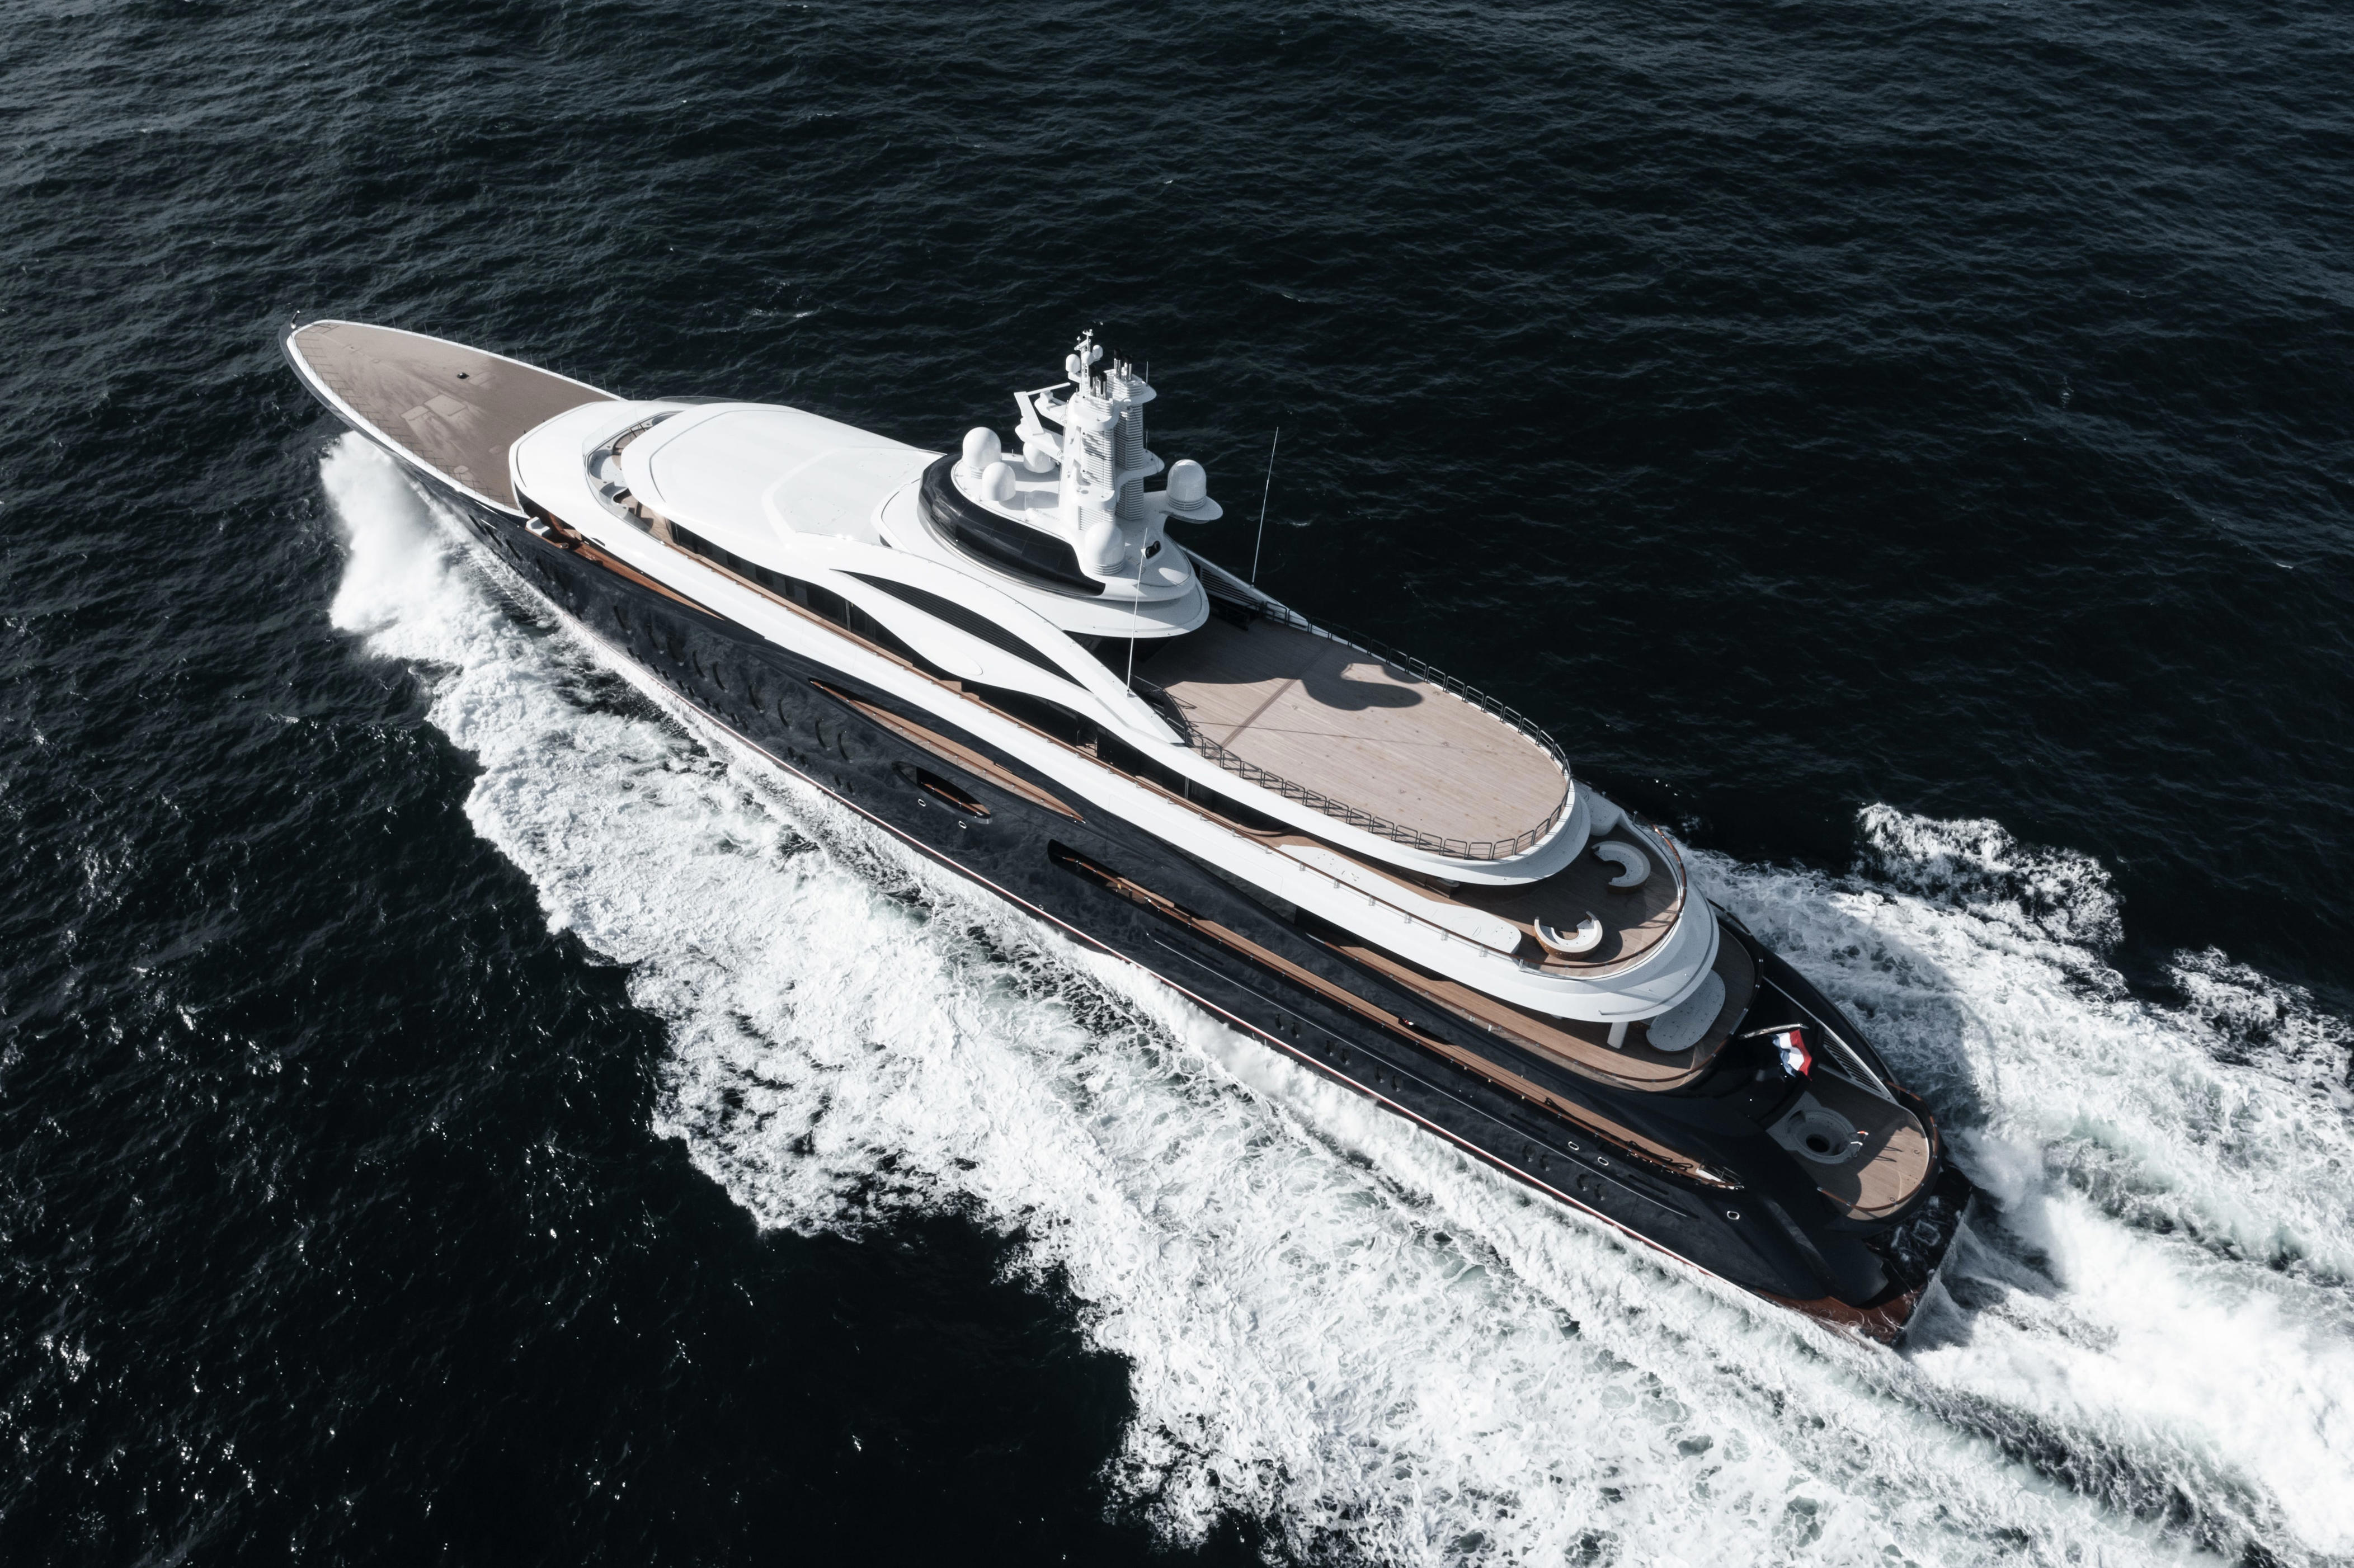 Aerial shots of the yacht seem to show a pool on its main deck and a helipad. <a>Ruben Griffioen/SuperYachtTimes</a>